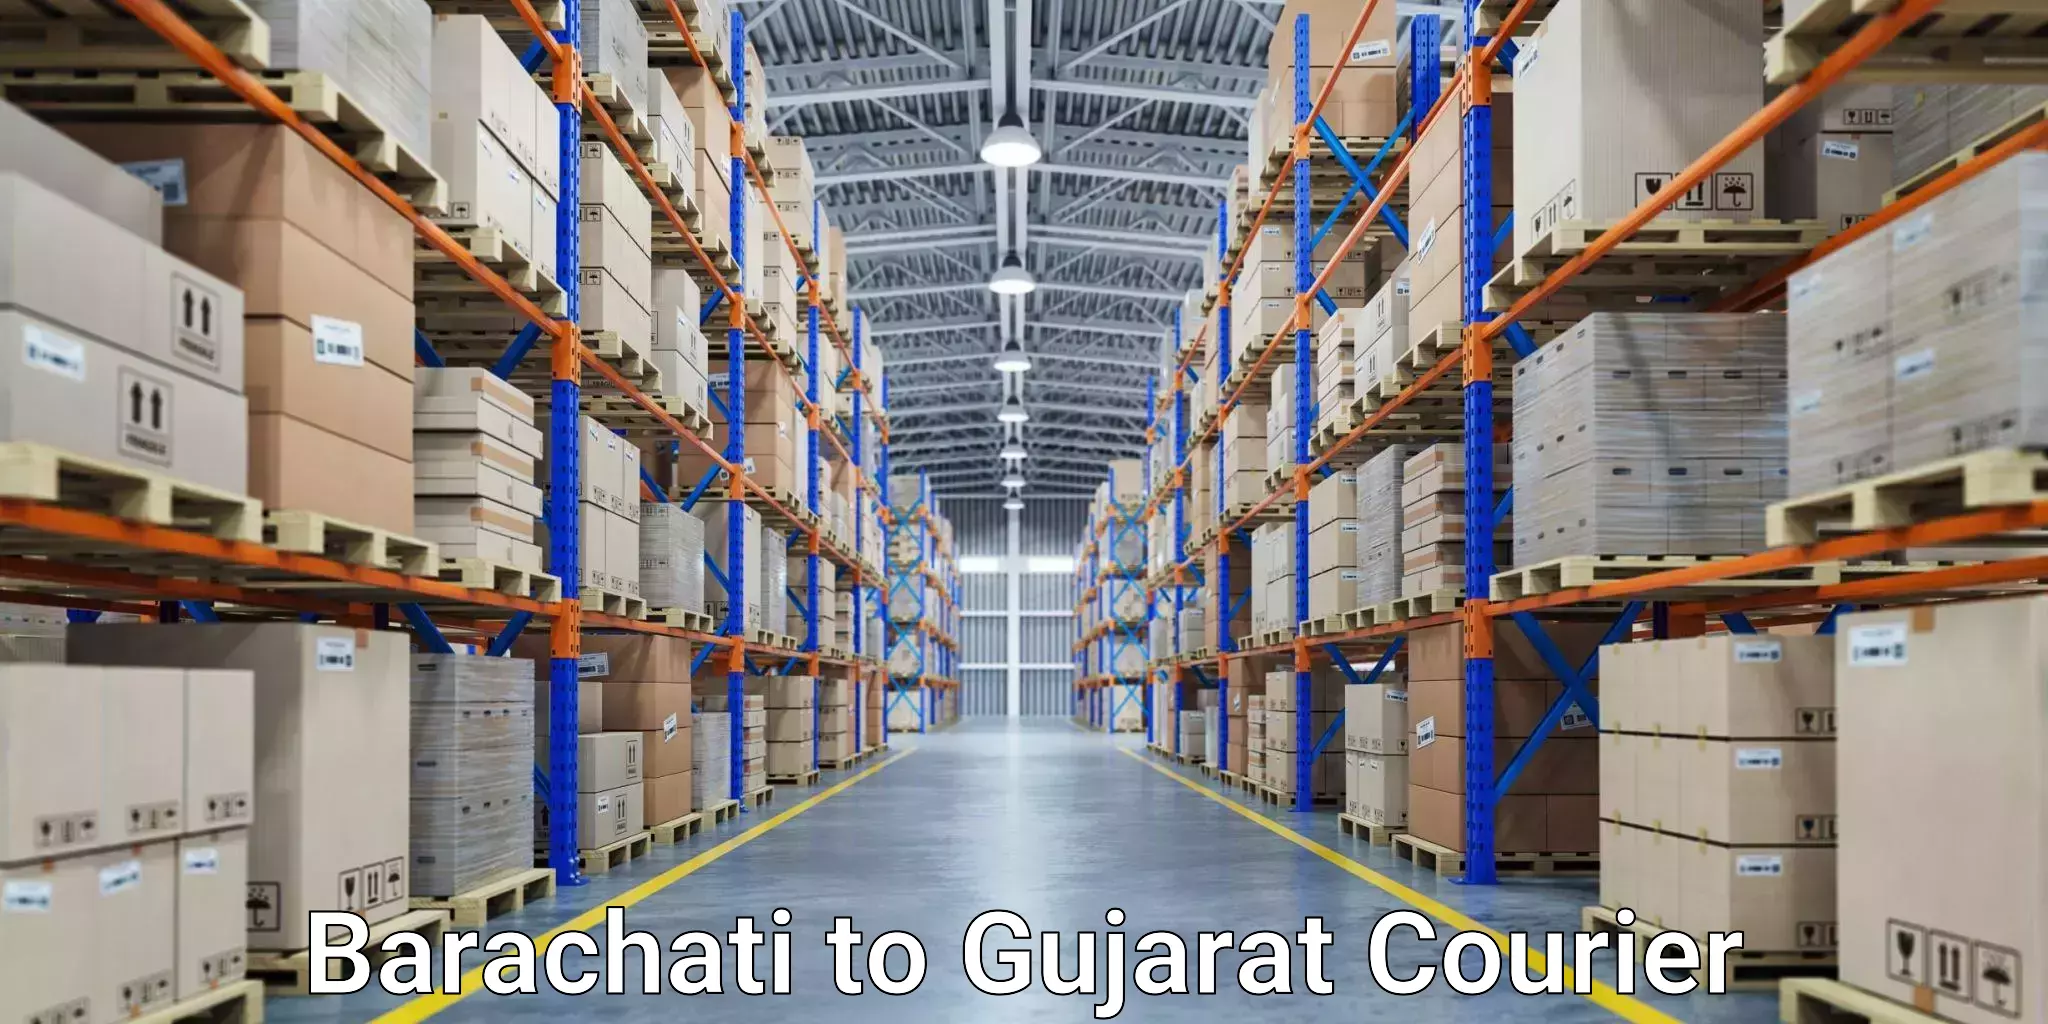 Express delivery network Barachati to Dwarka